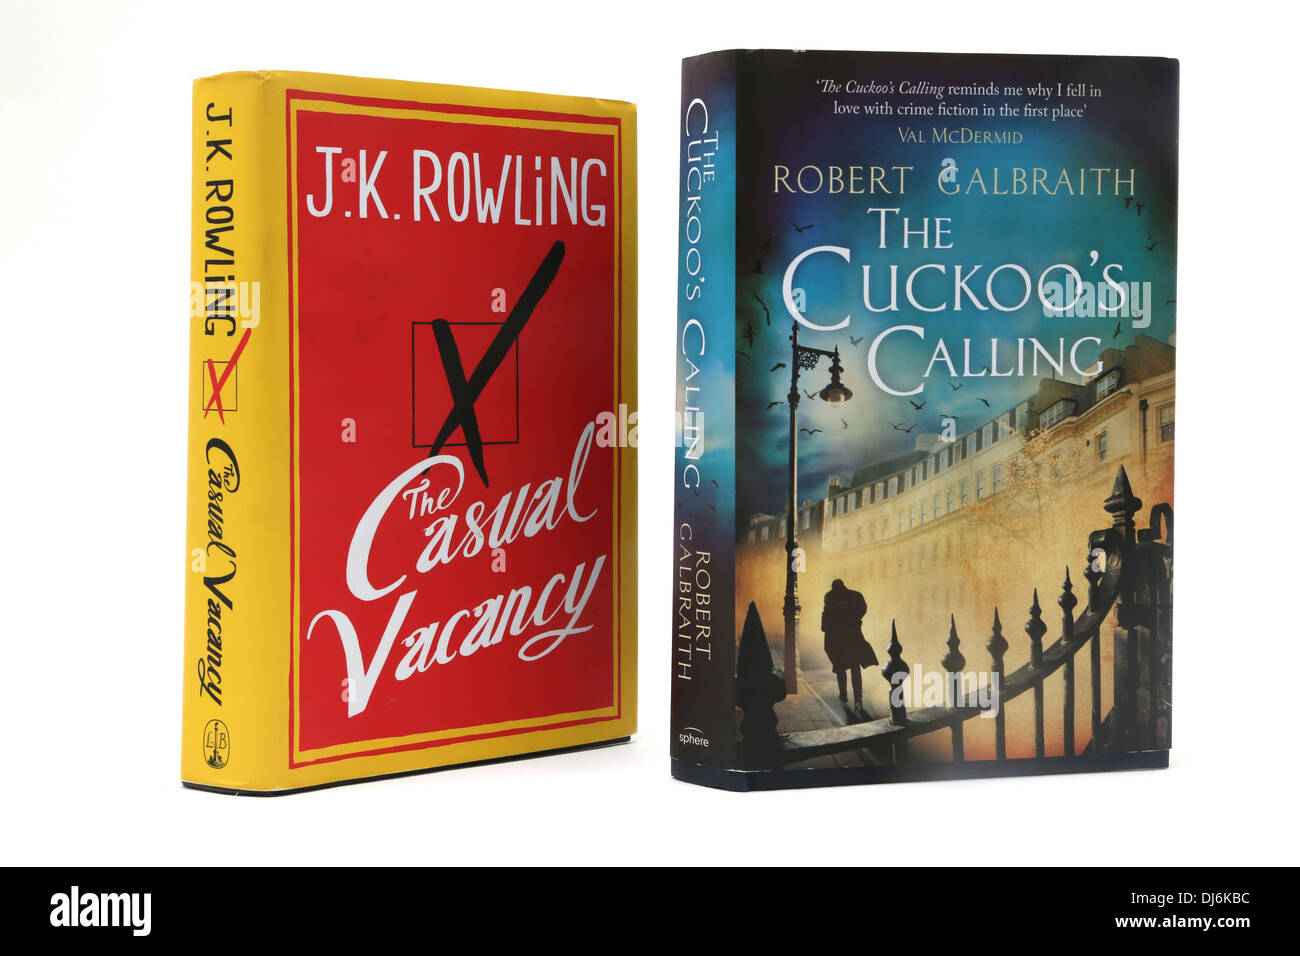 Hardback Books The Casual Vacancy and The Cuckoo's Calling Both By J.K Rowling Stock Photo